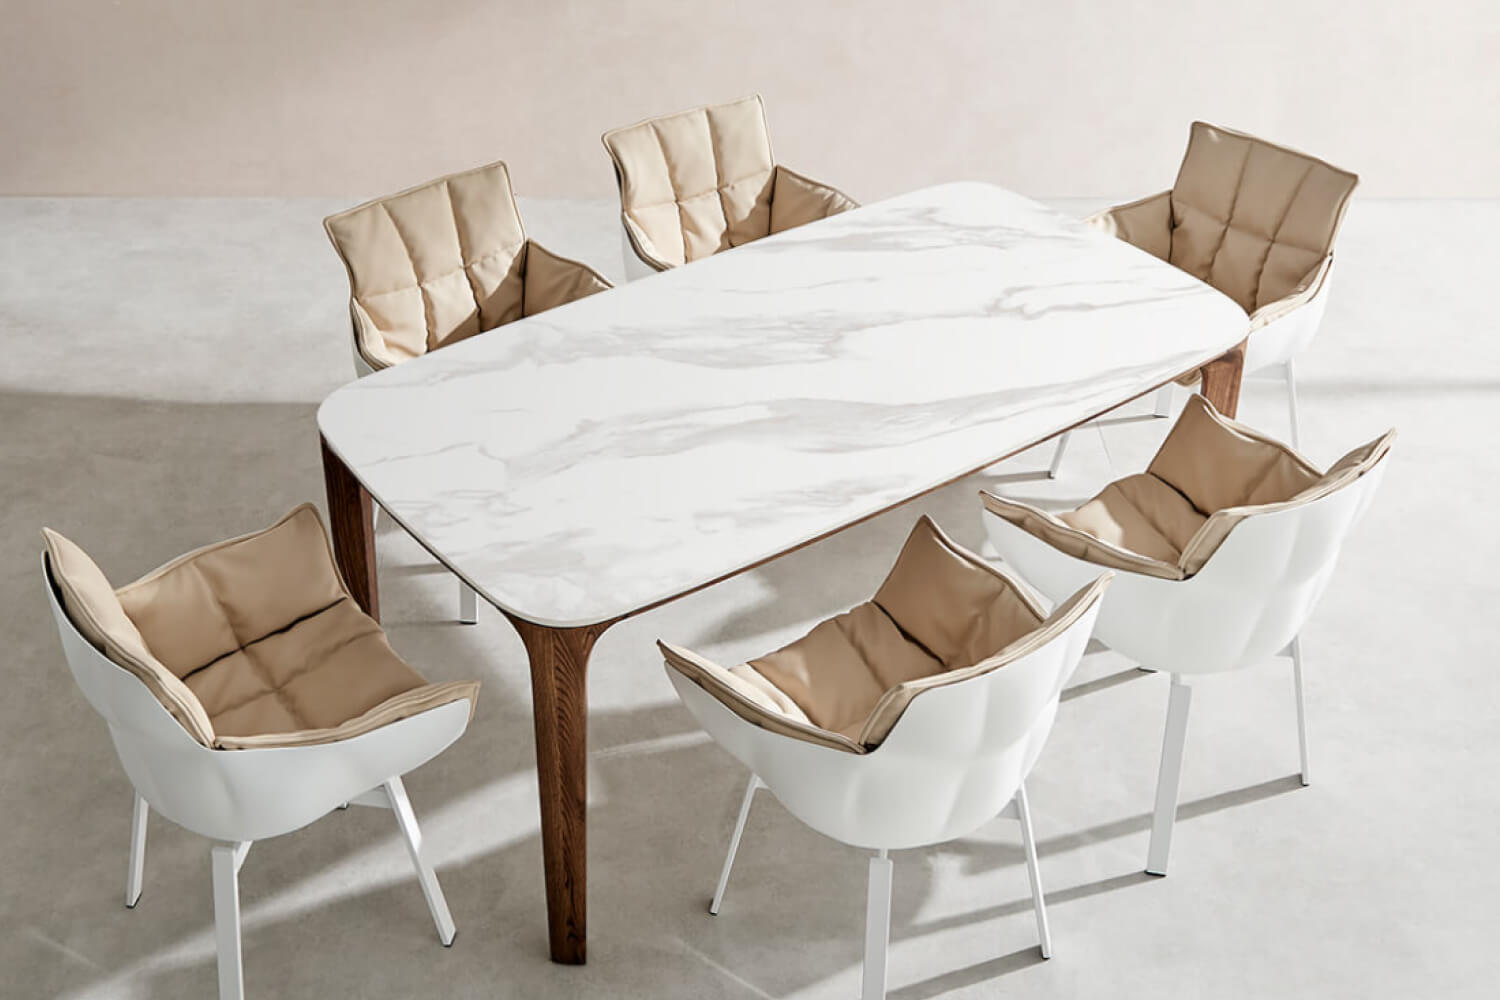 The Myko Modern Rectangular Ceramic Dining Table, surrounded by white chairs with beige cushions, creating a chic and contemporary dining space.